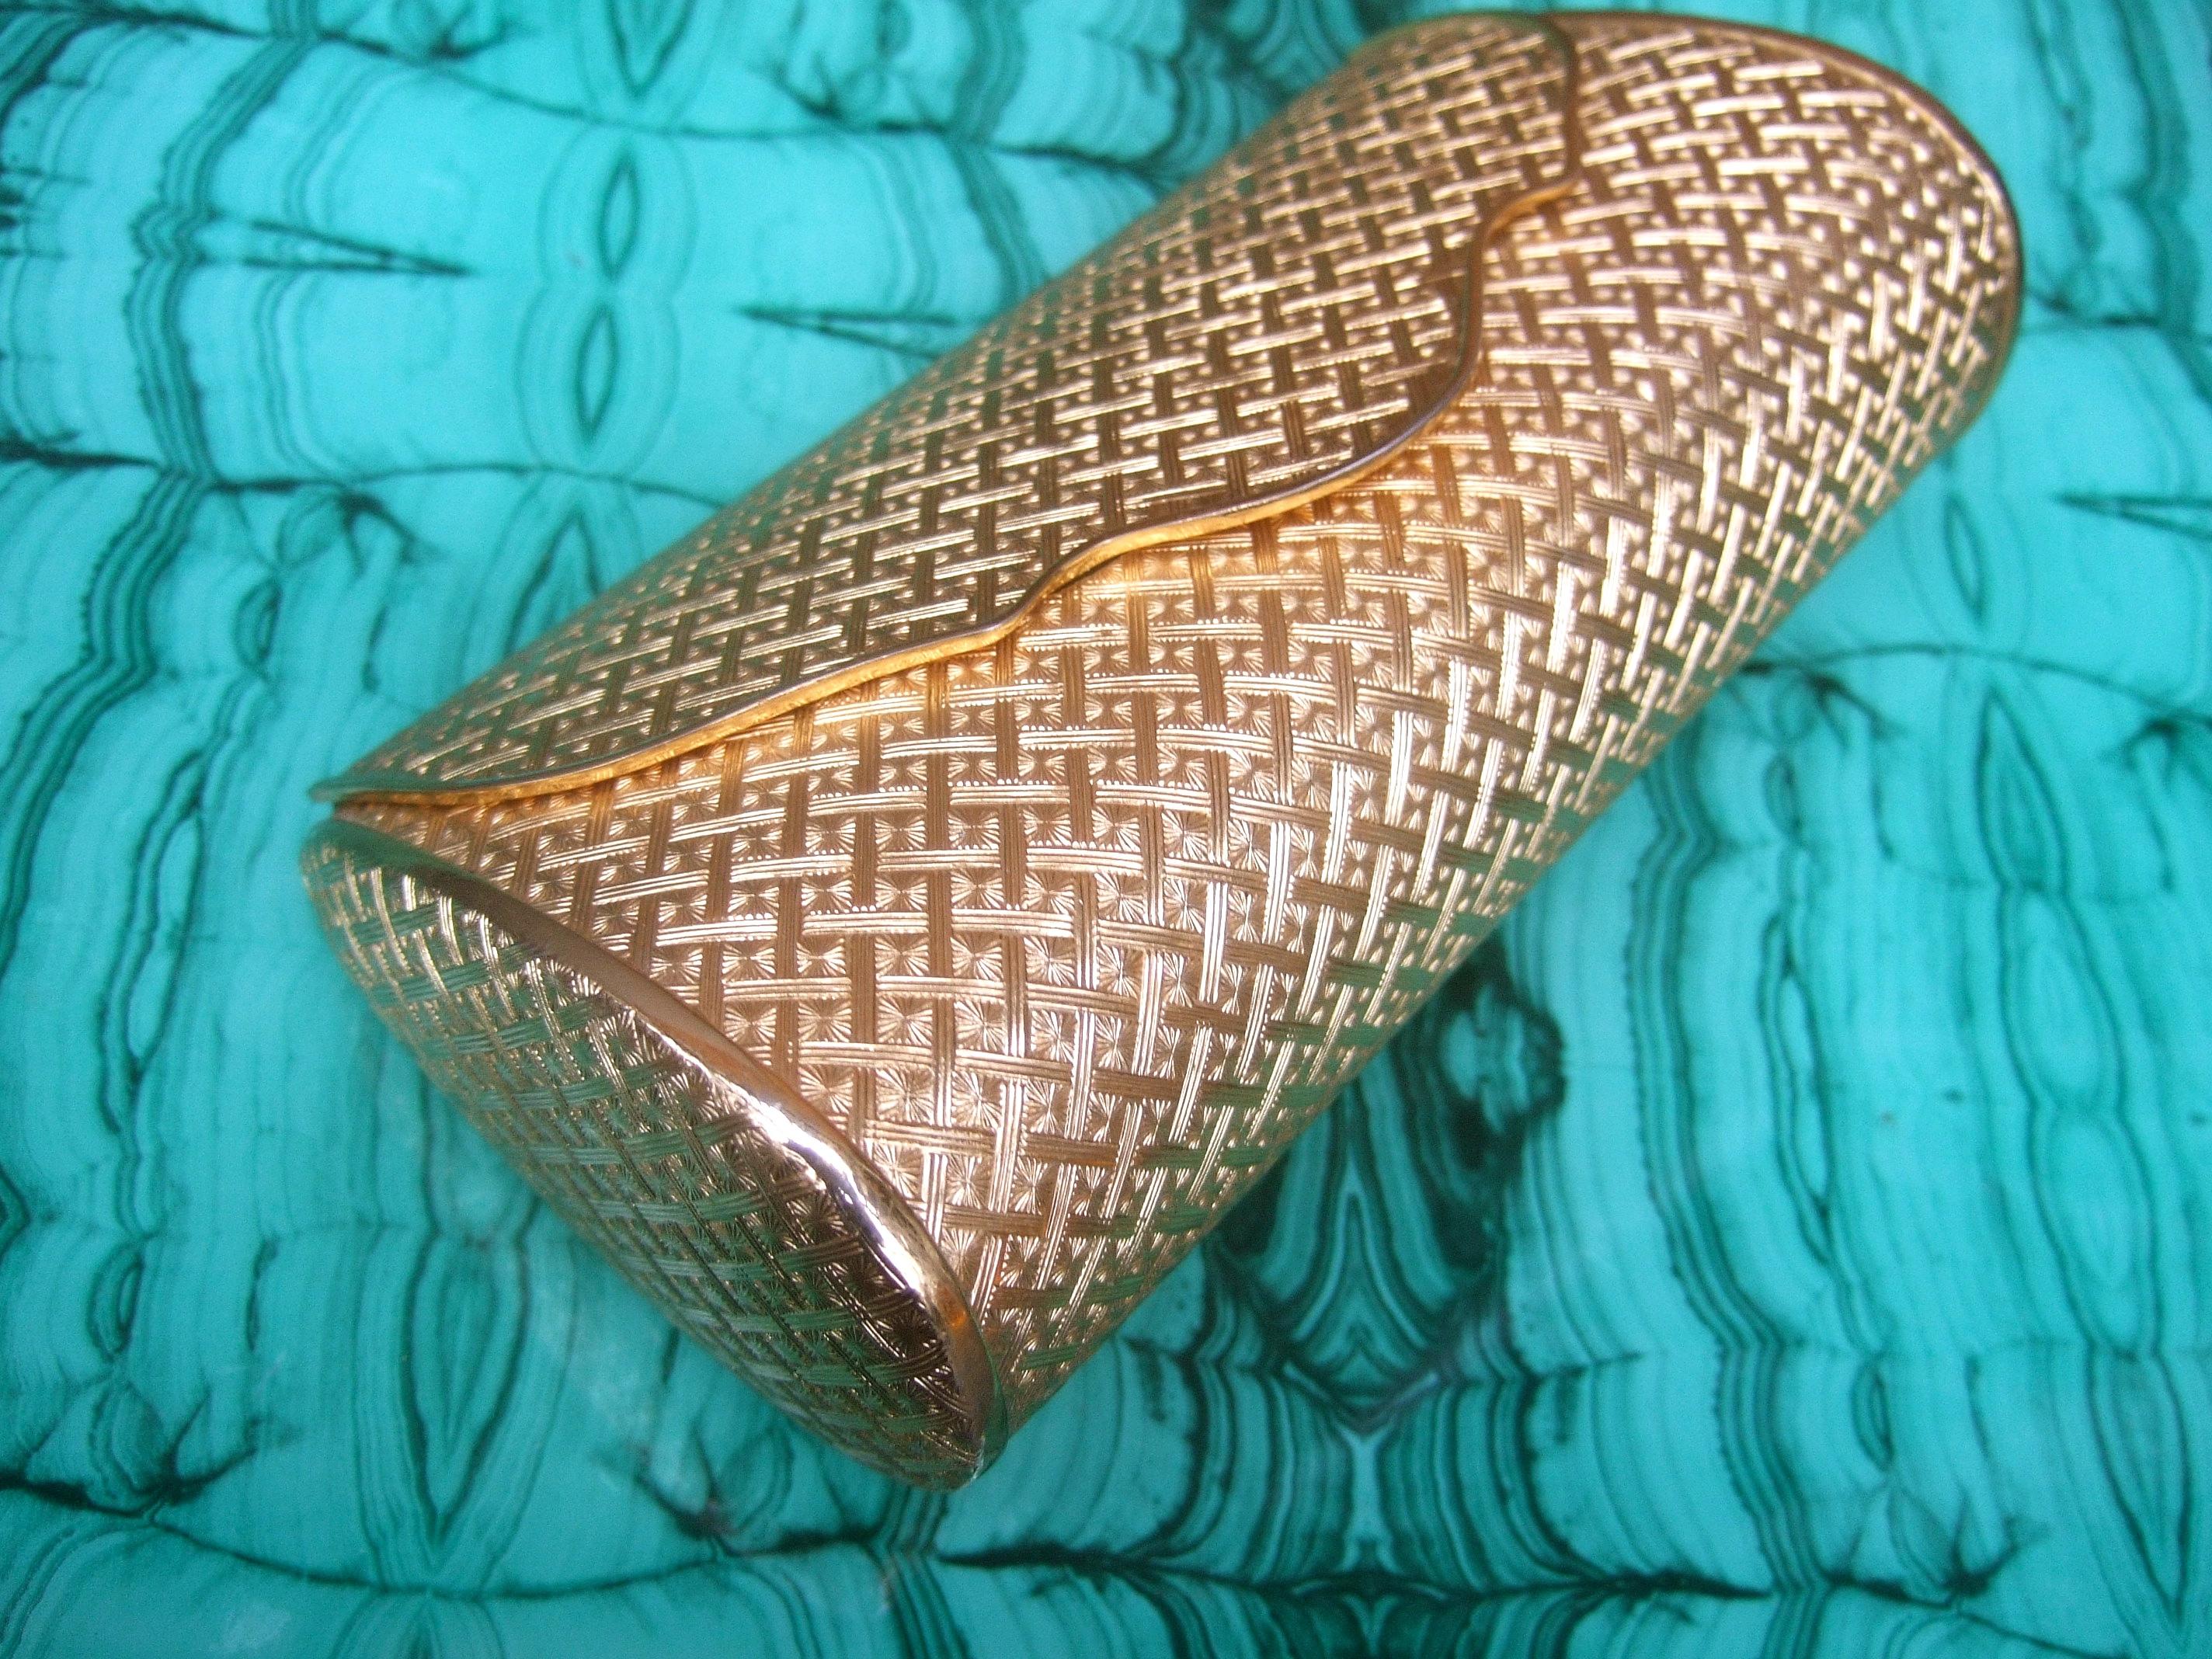 Saks Fifth Avenue Italian gilt metal minaudier' evening bag c 1970s
The sleek gold metal evening clutch is designed with impressed geometric designs throughout
A stationary vanity mirror is placed underneath the hinged lid cover 
Lined in golden